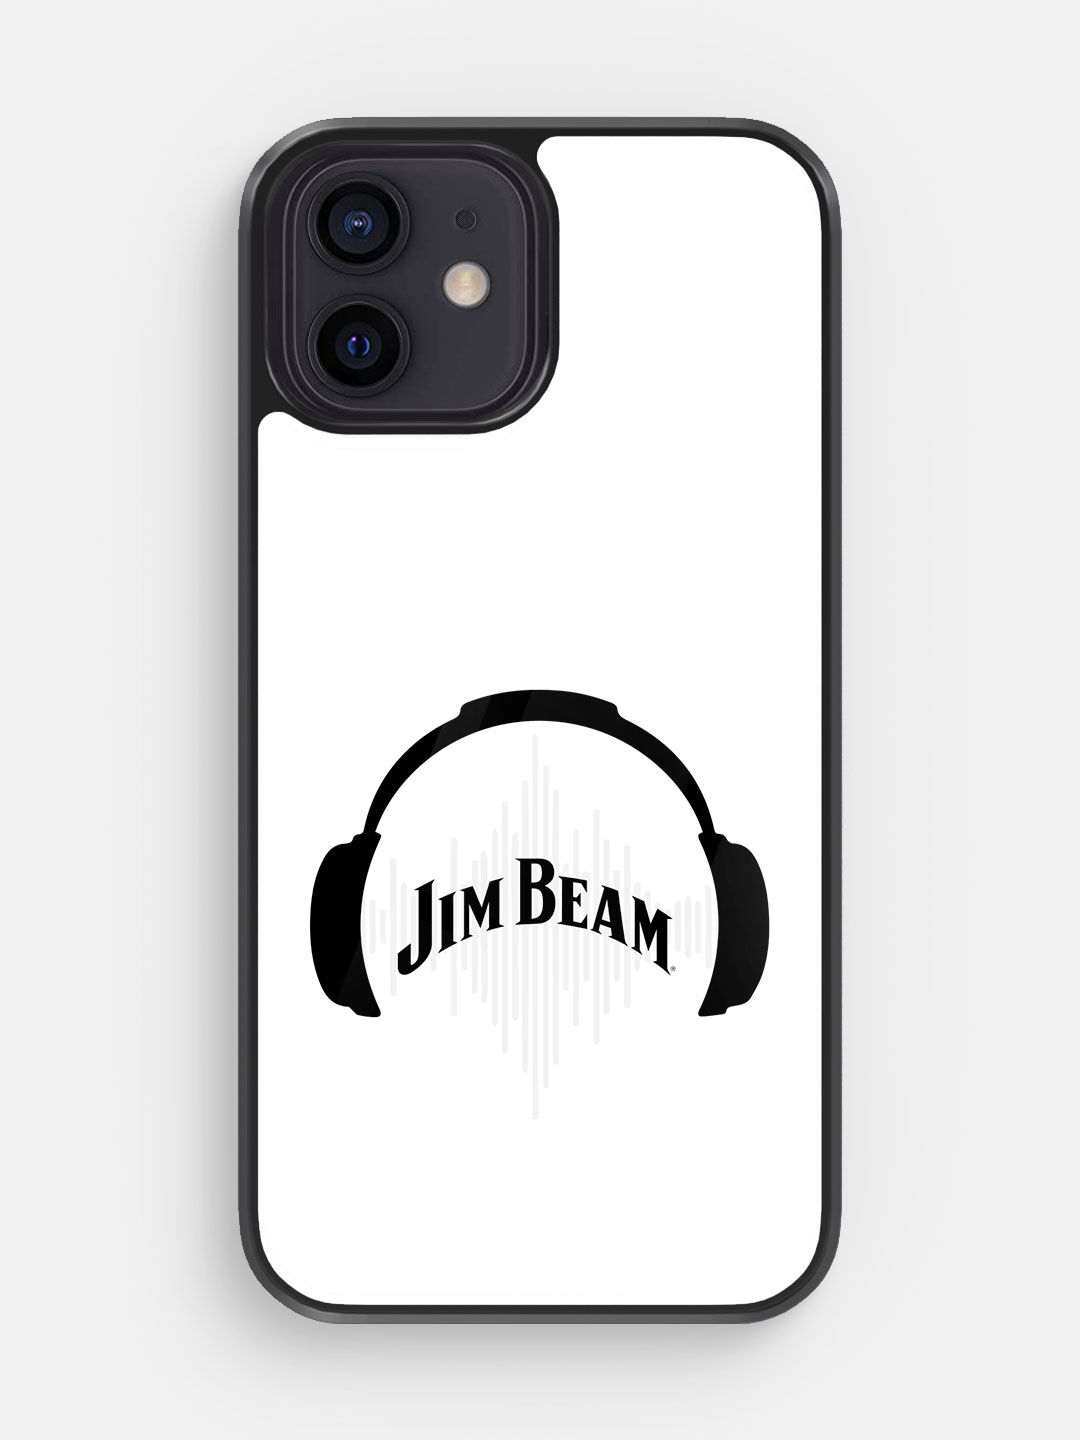 Jim Beam Solid Sound - Glass Case For iPhone 12 Mini